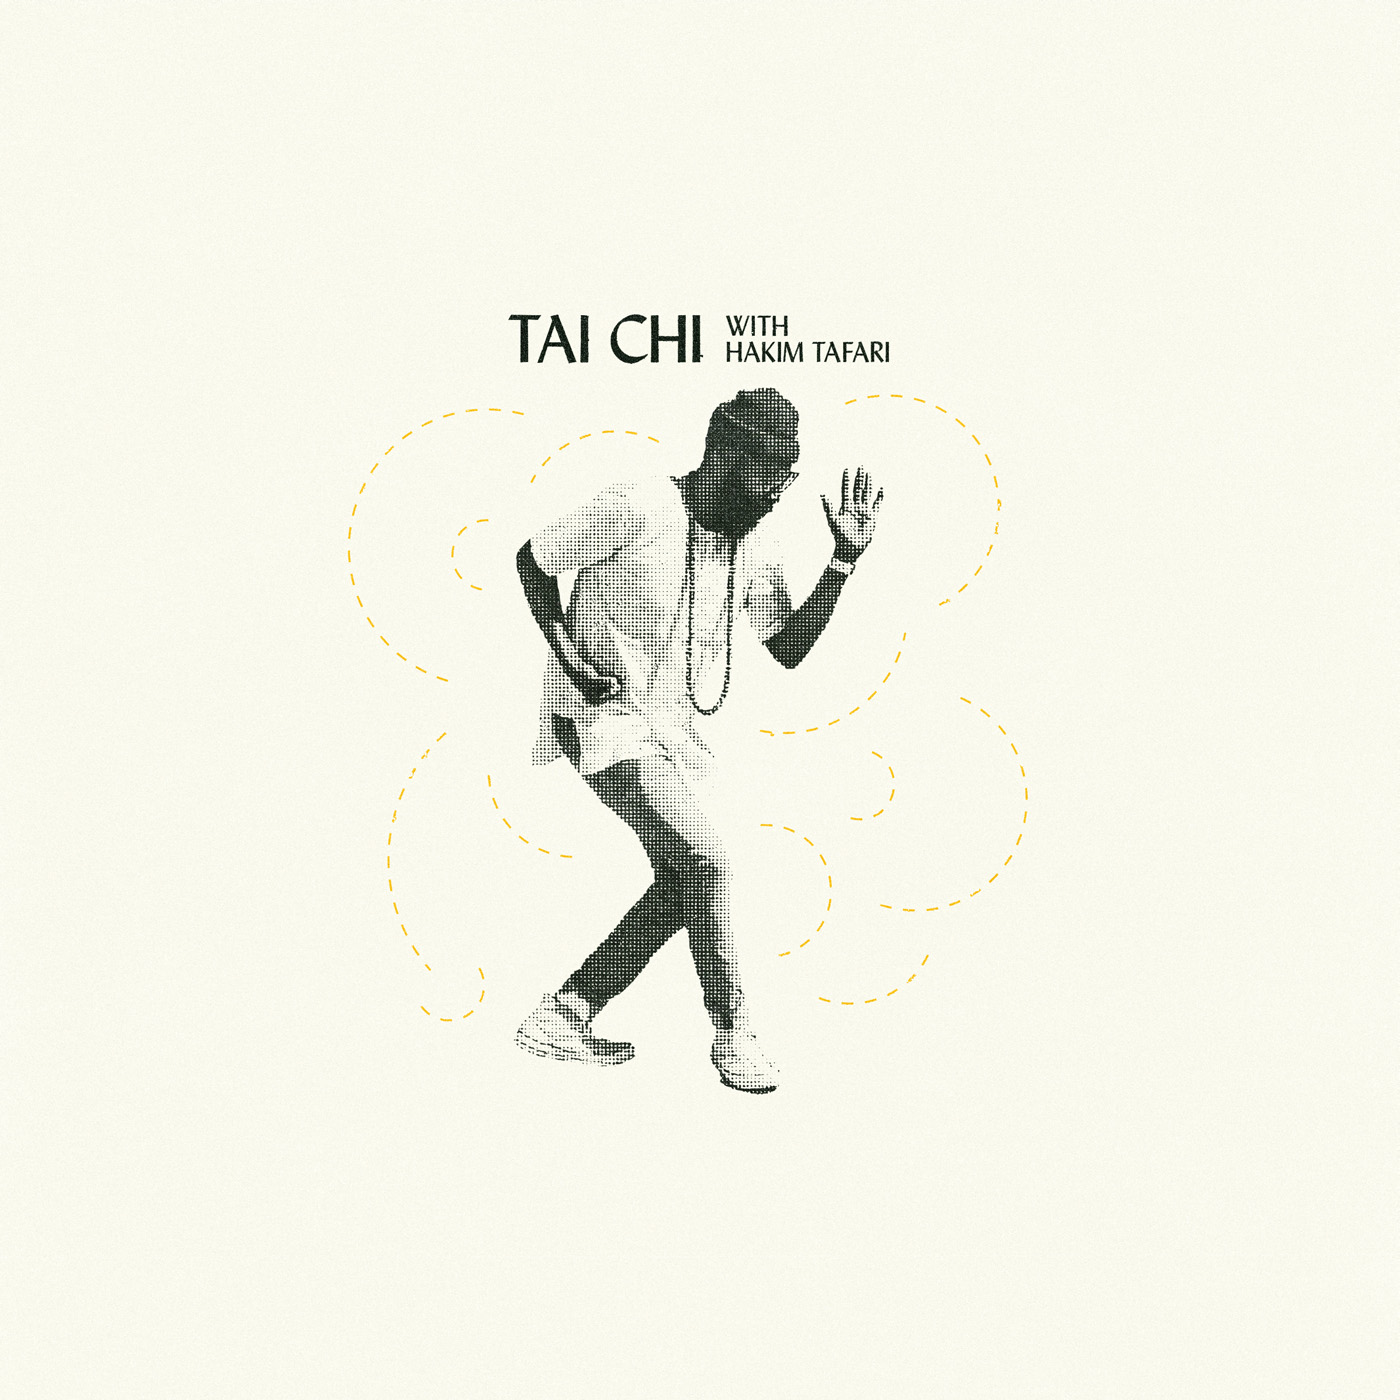 Photo of dancing man titled "TAI CHI with Hakim Tafari" prominently displayed for attention.